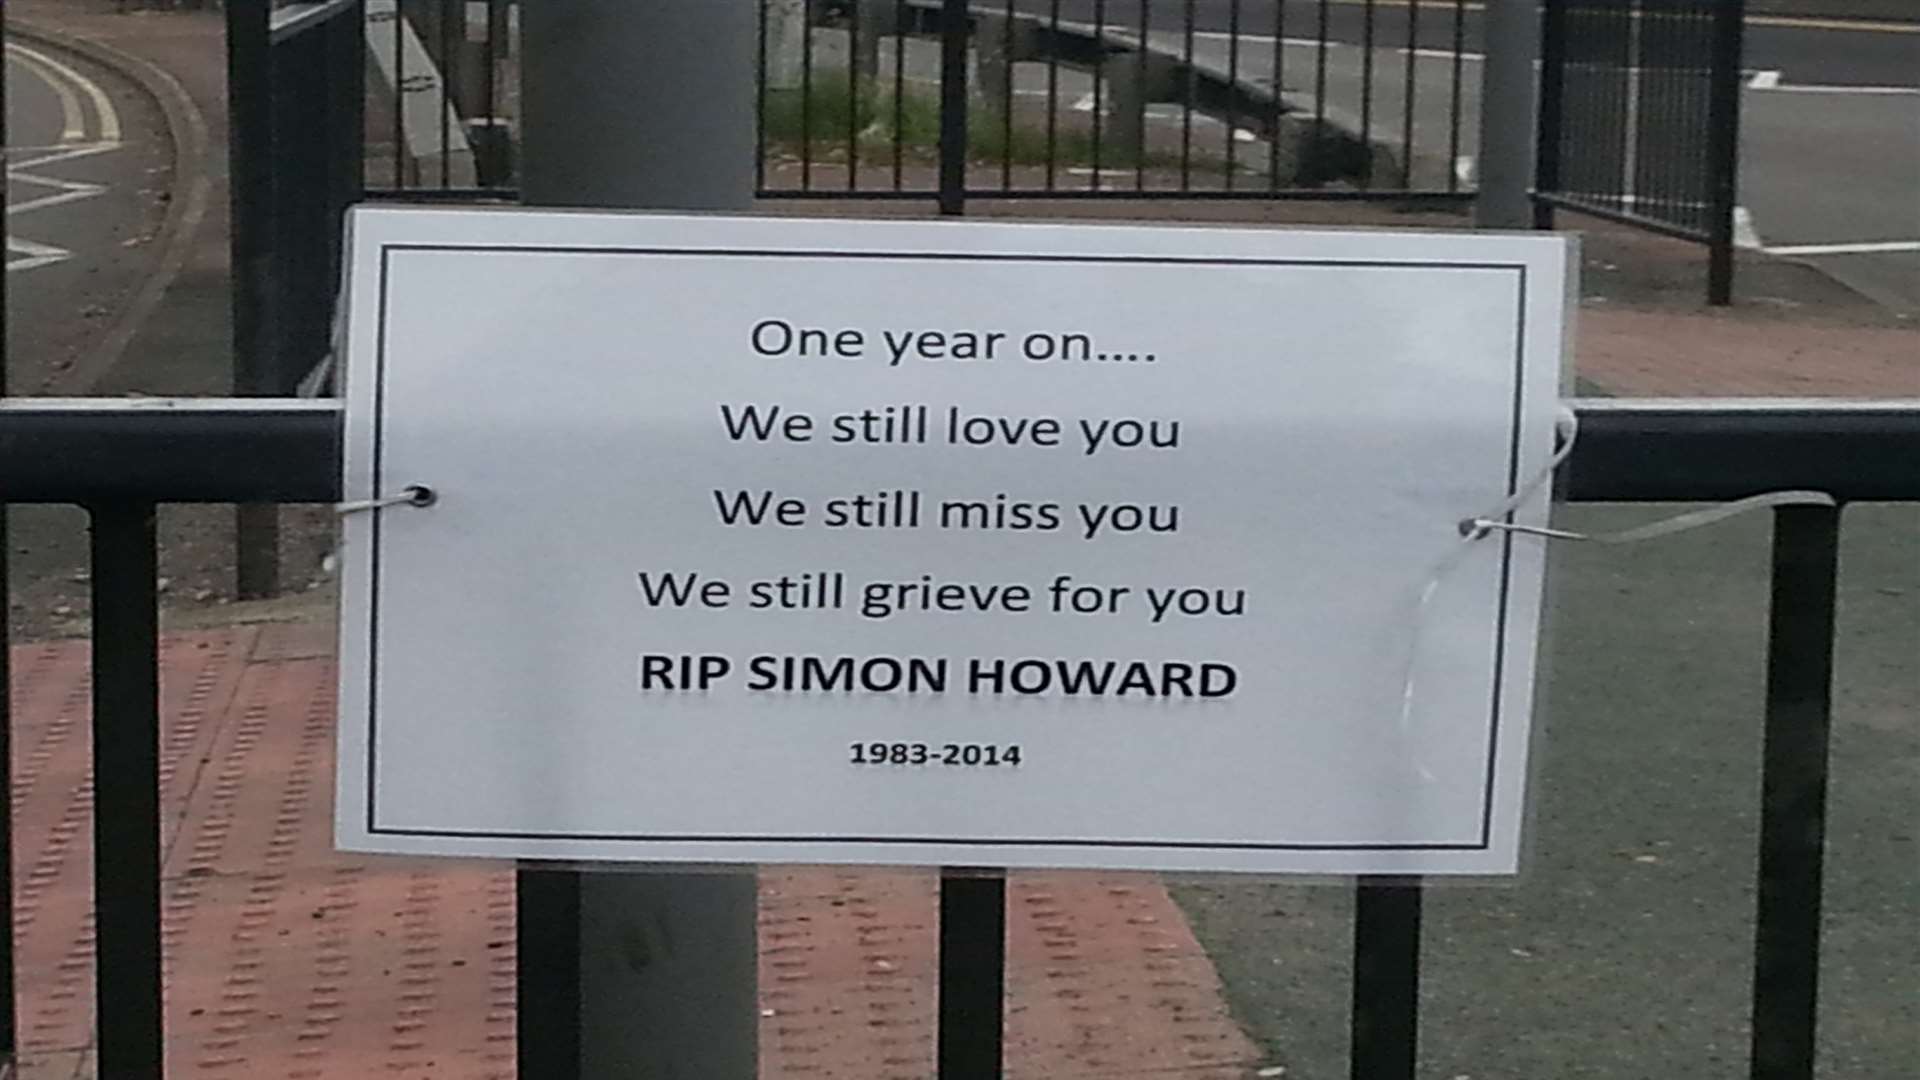 A tribute message to road death victim Simon Howard, one year on from the tragedy.